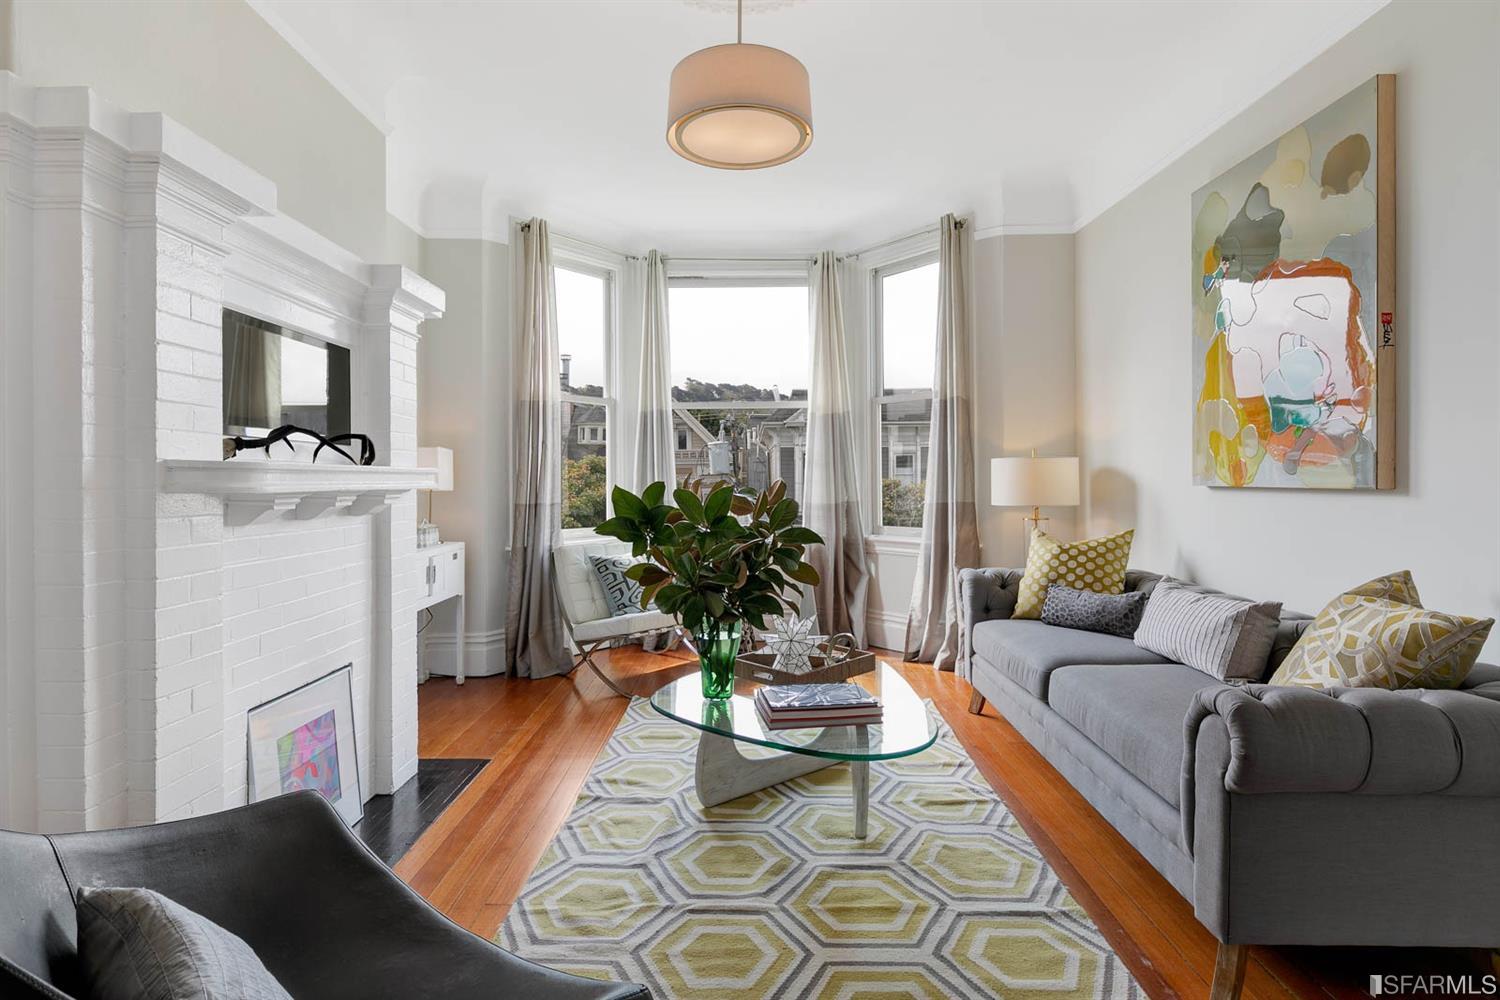 Property Photo: Living room, featuring wood floors and bay windows